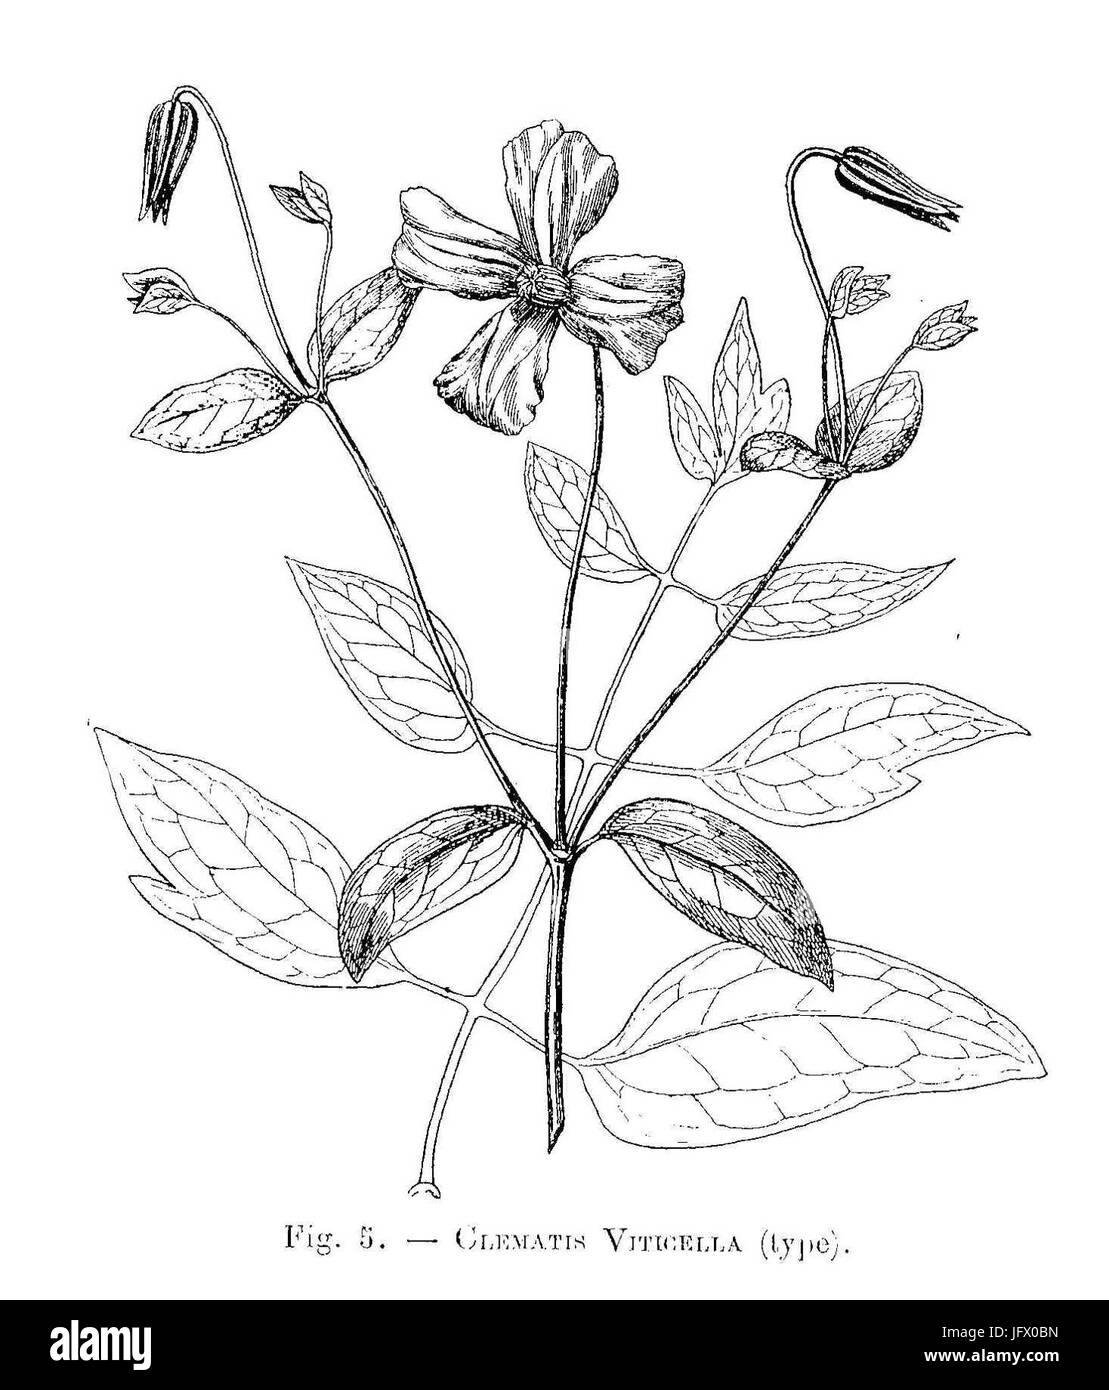 Clematis viticella (type dessiné) Stock Photo